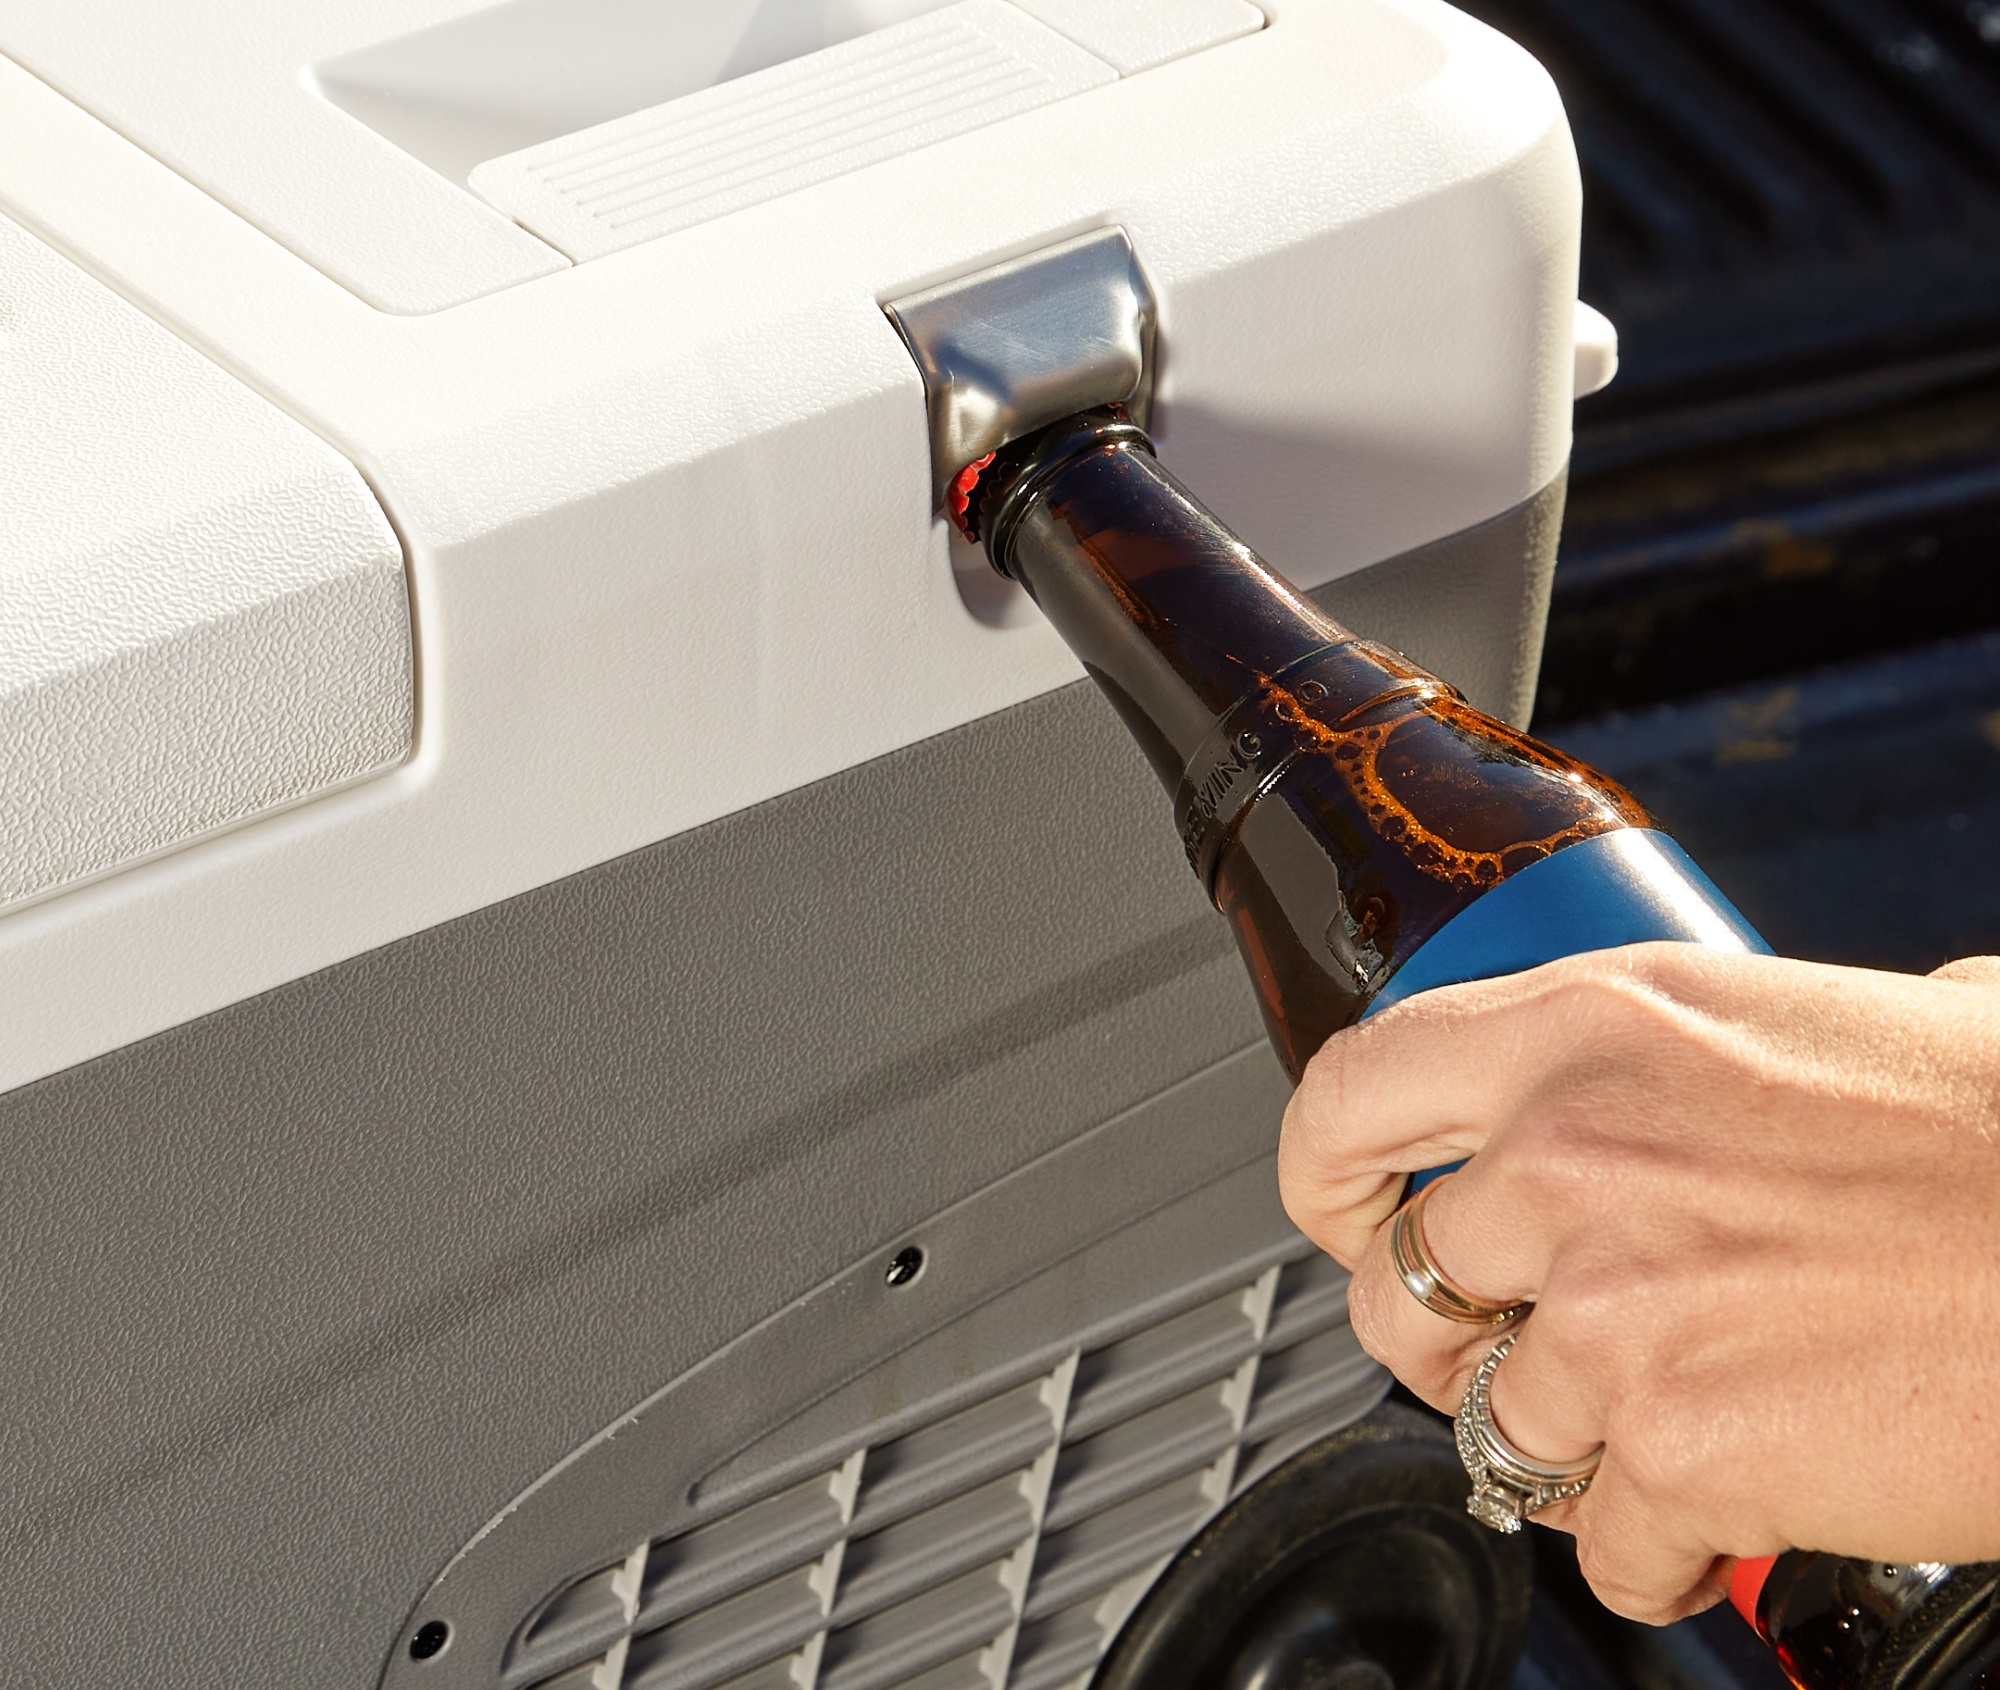 Worx 20V Electric & Battery Powered Cooler Review